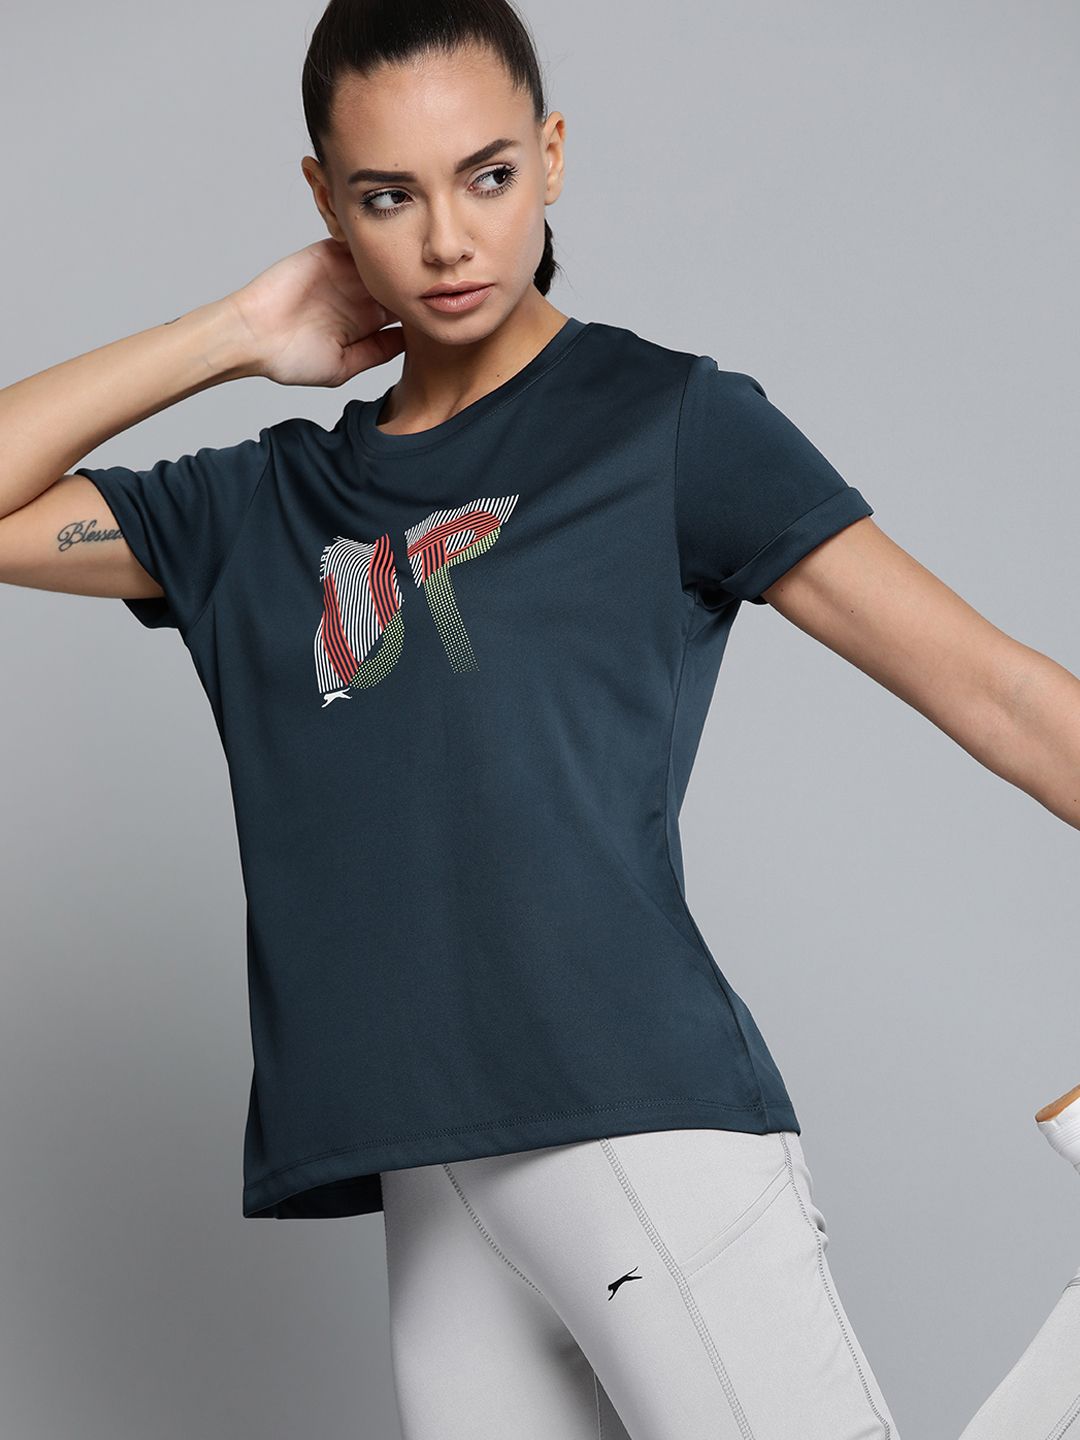 Slazenger Women Teal Blue & White Typography Printed T-shirt Price in India